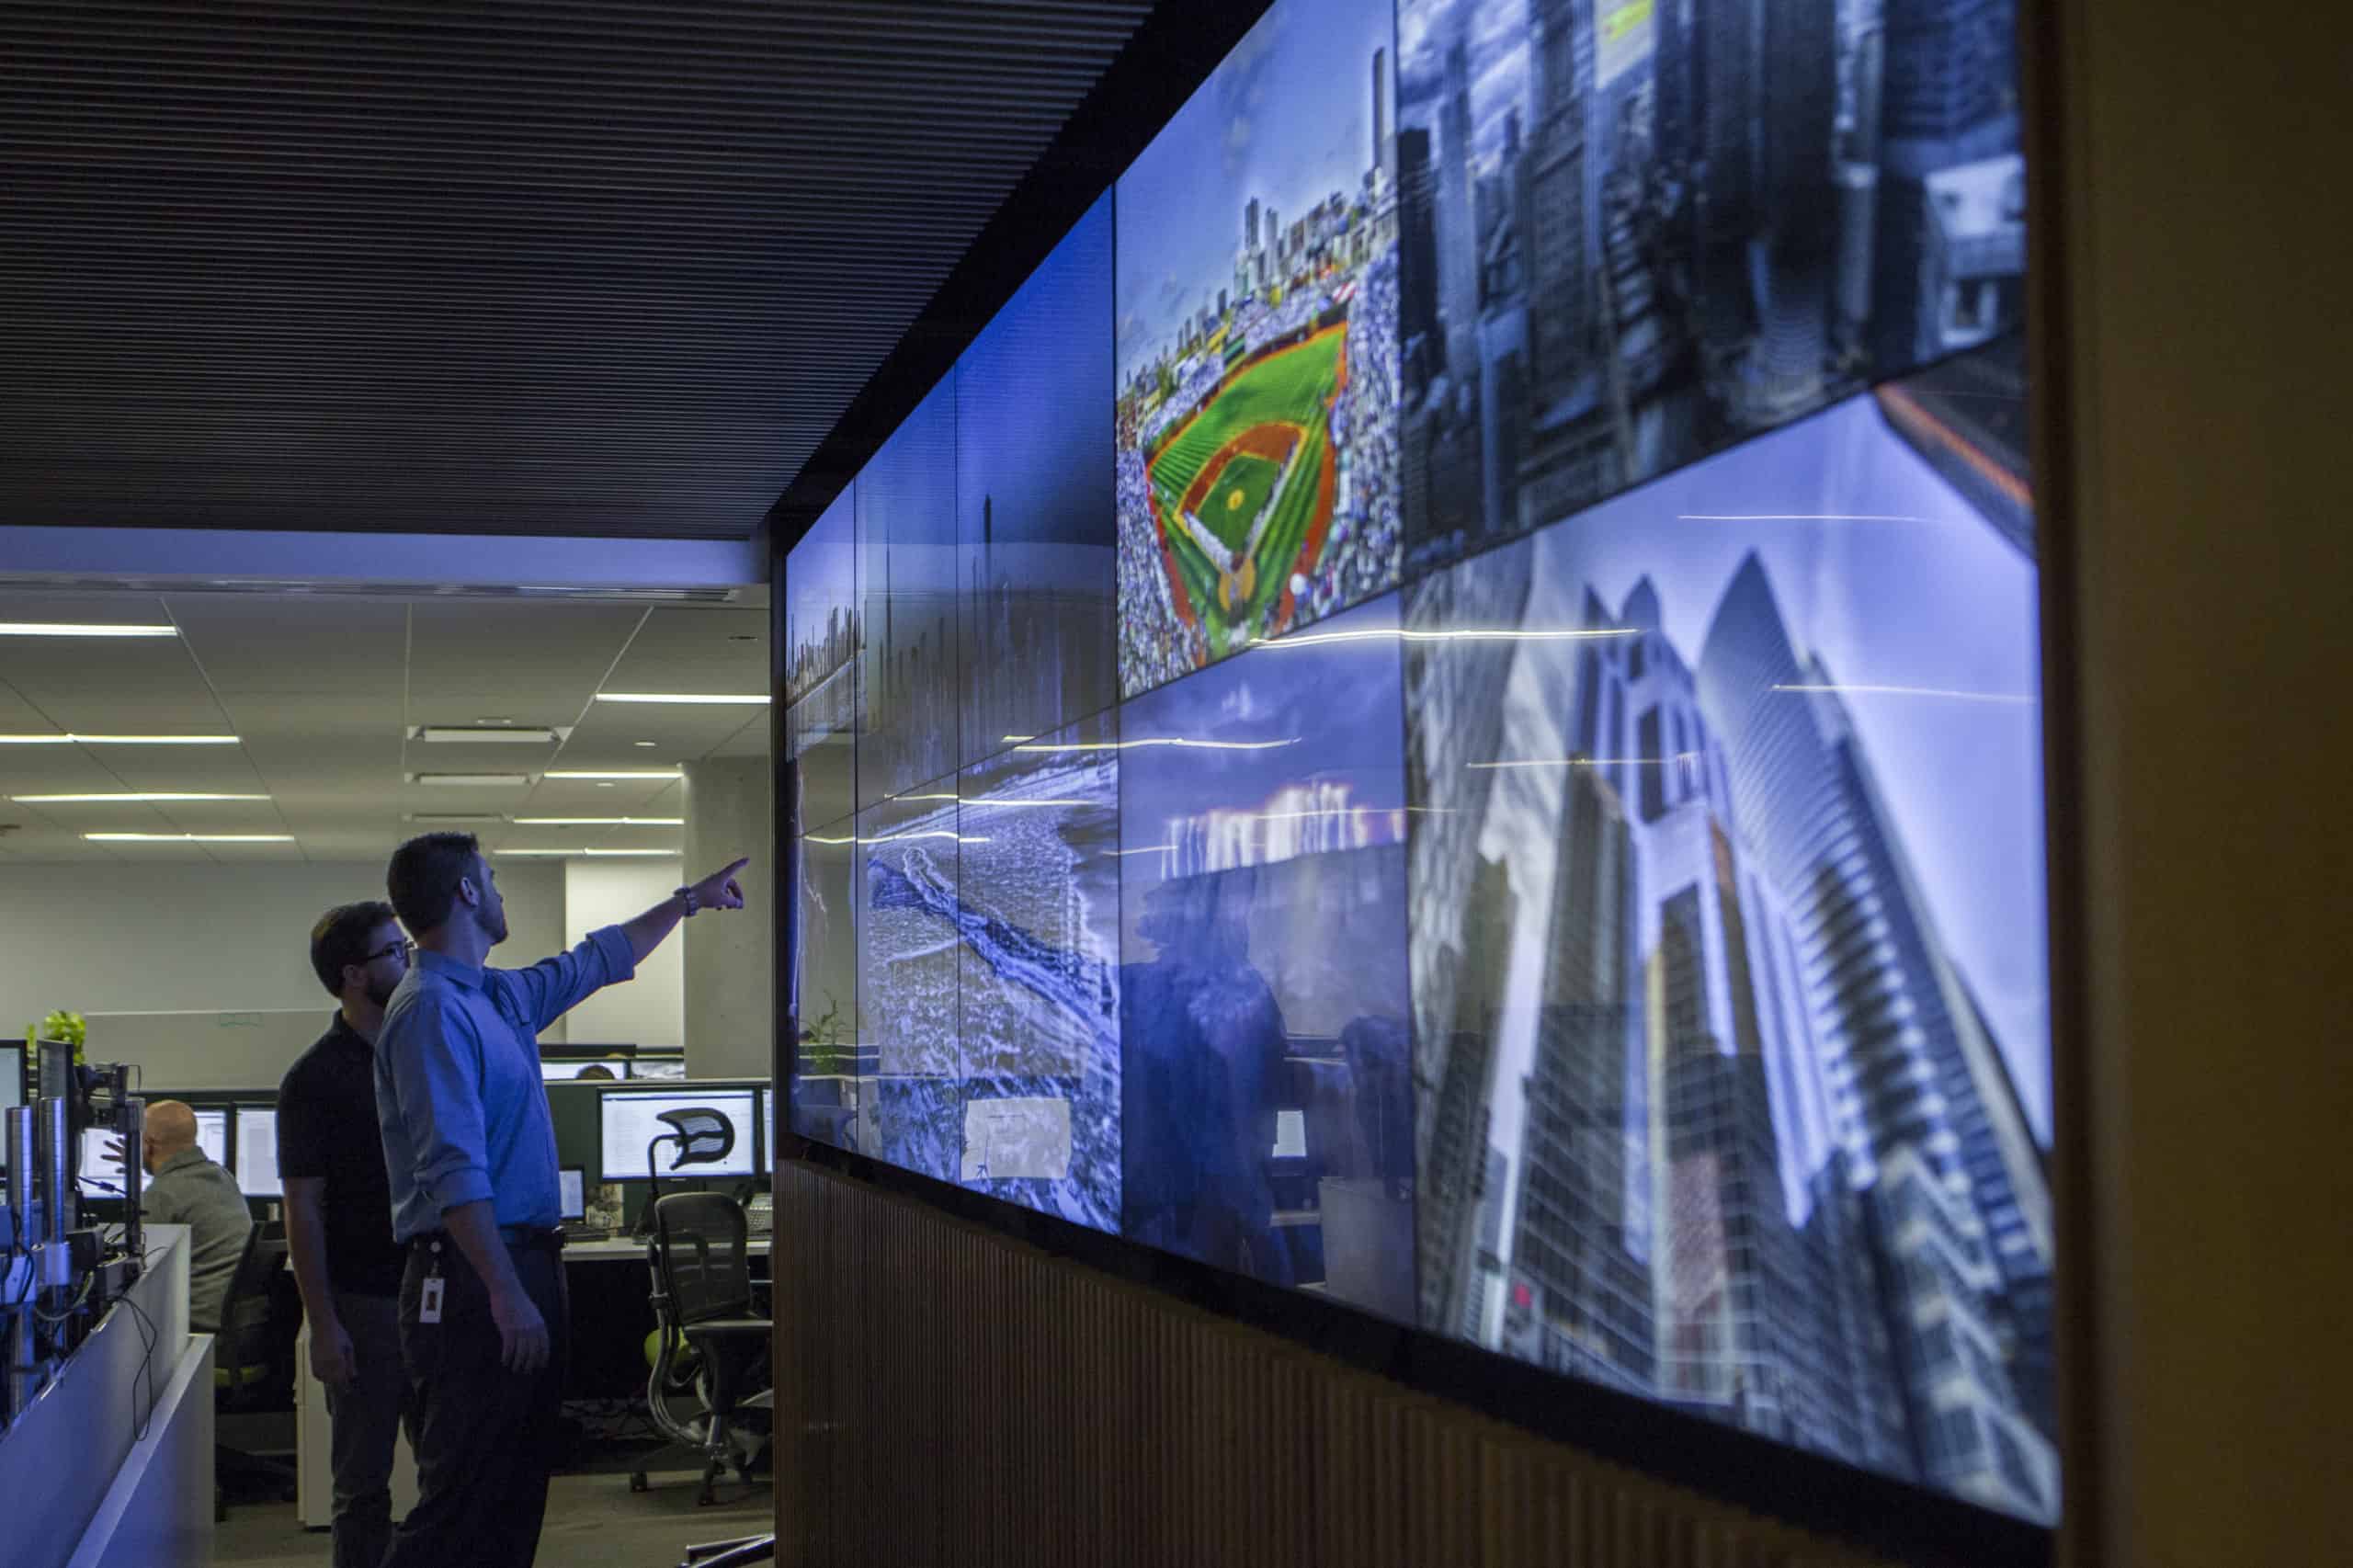 Invenergy control center video wall